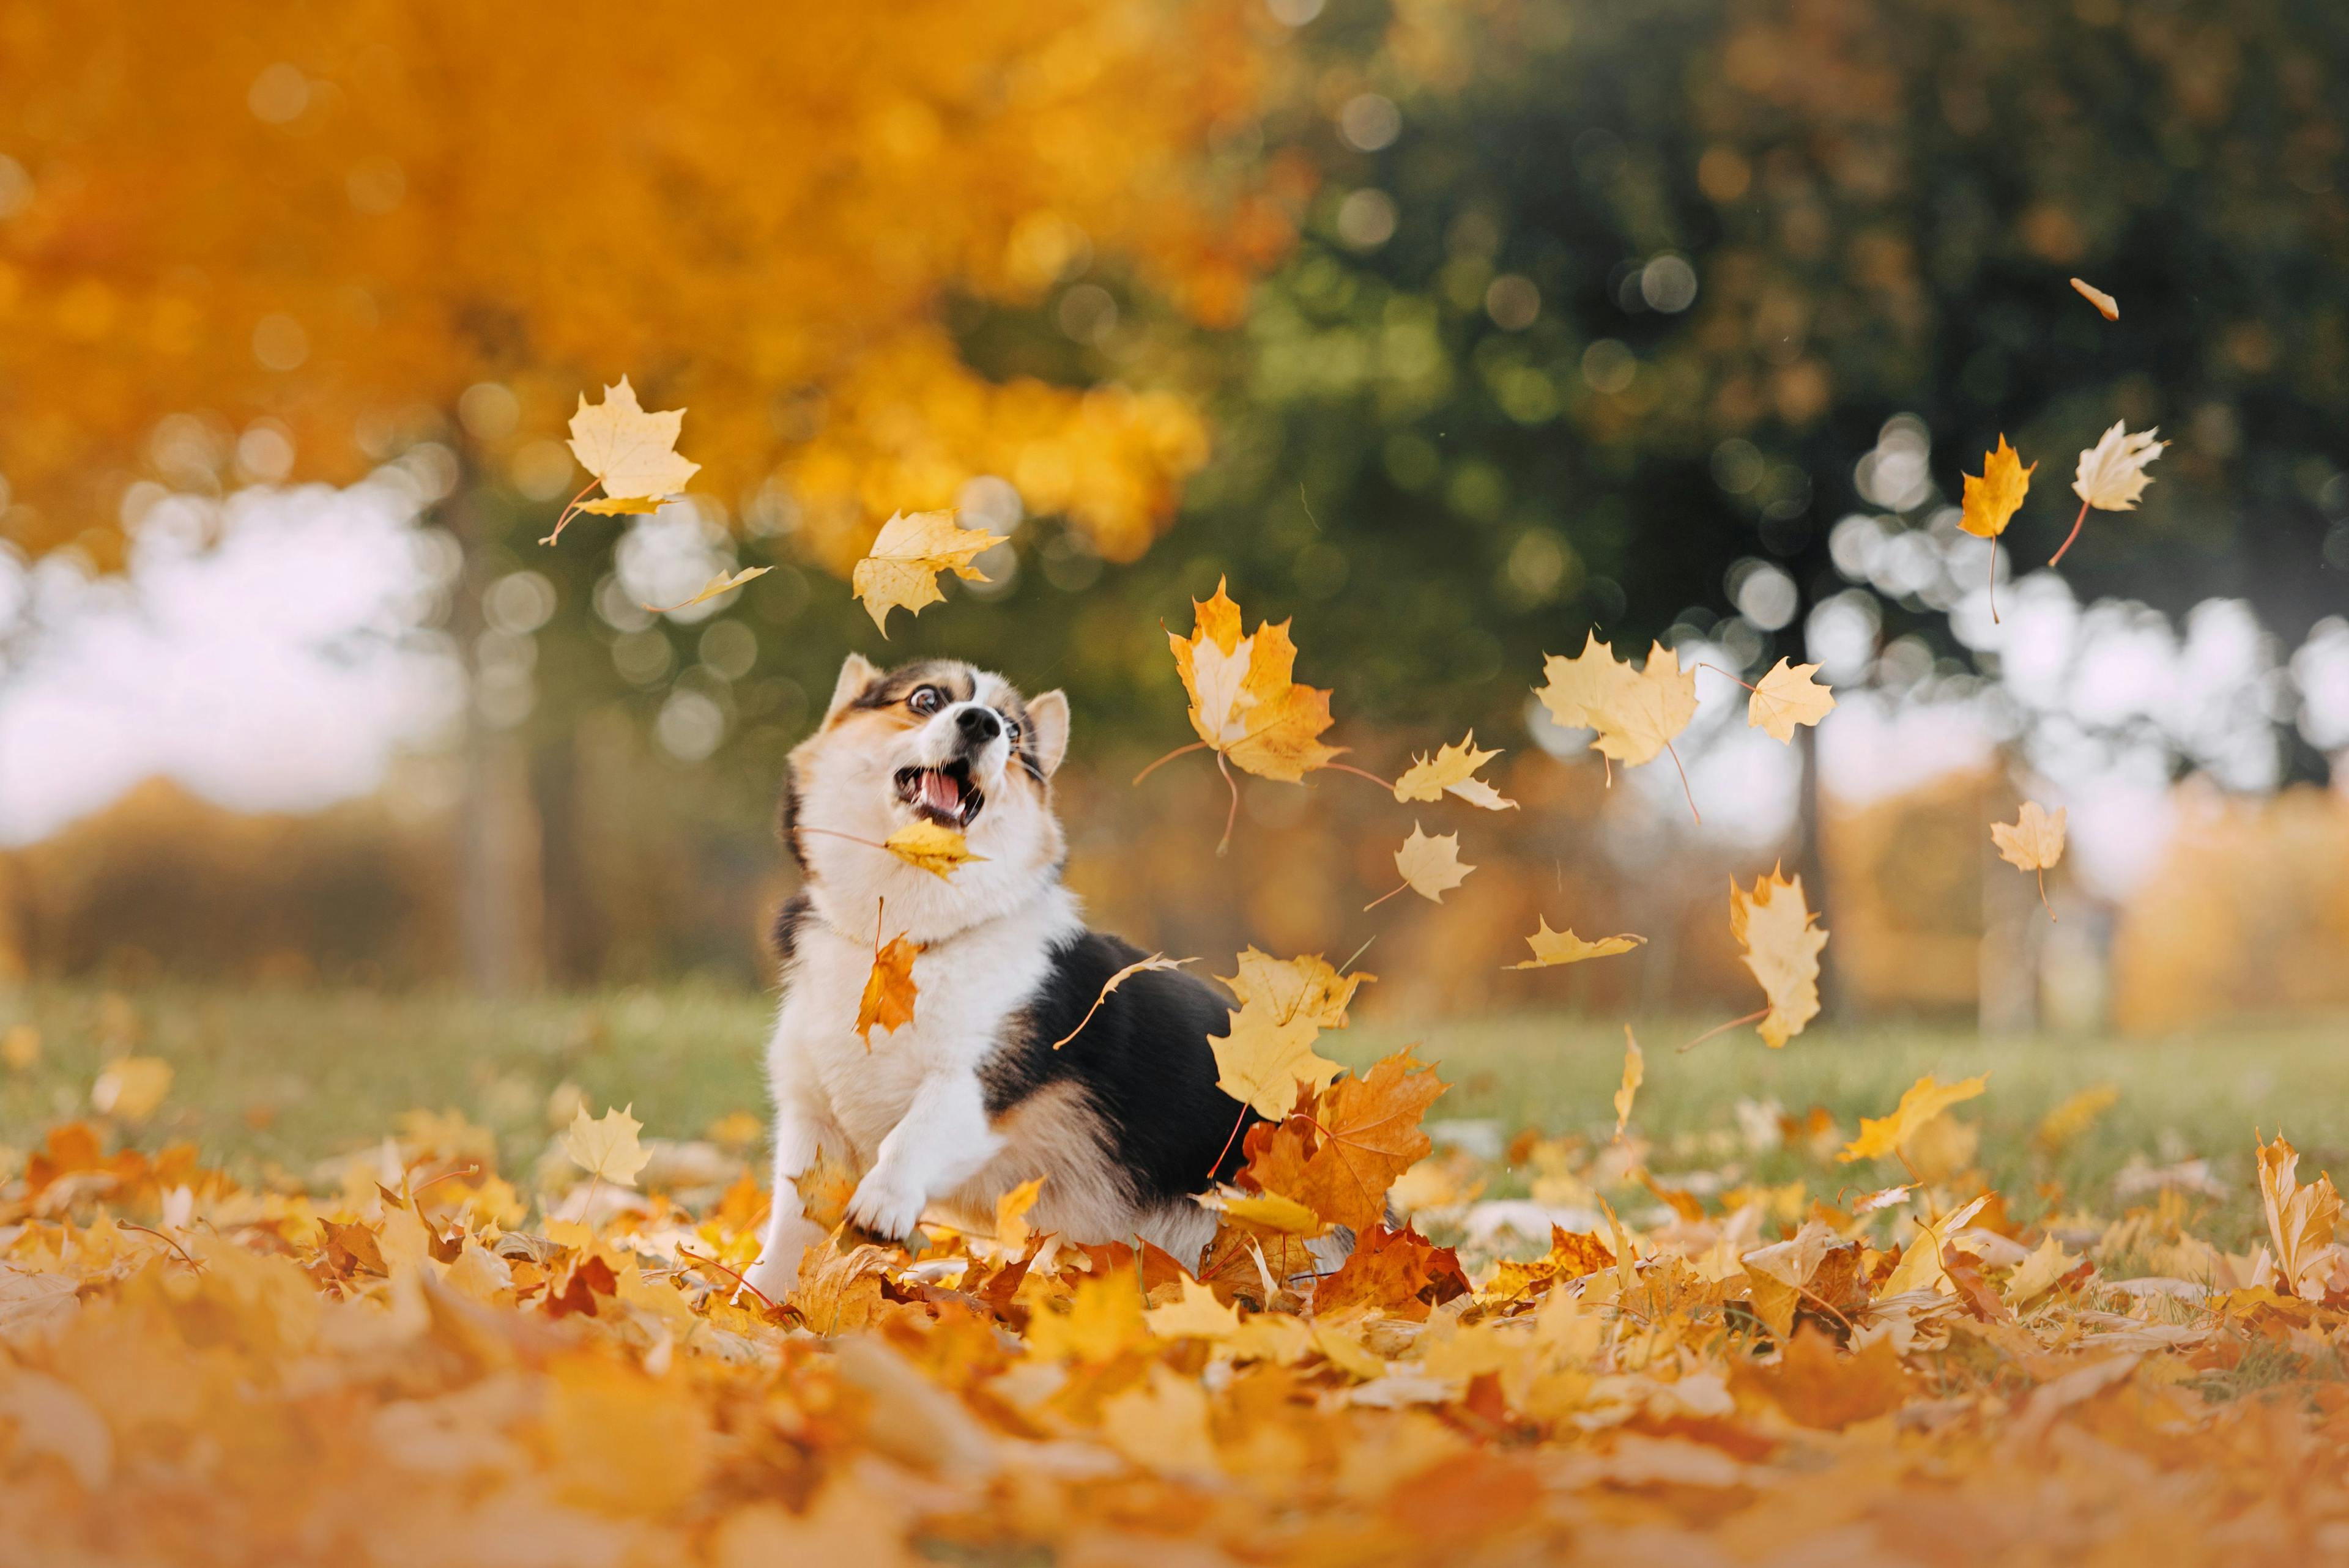 Dog jumping in pile of leaves